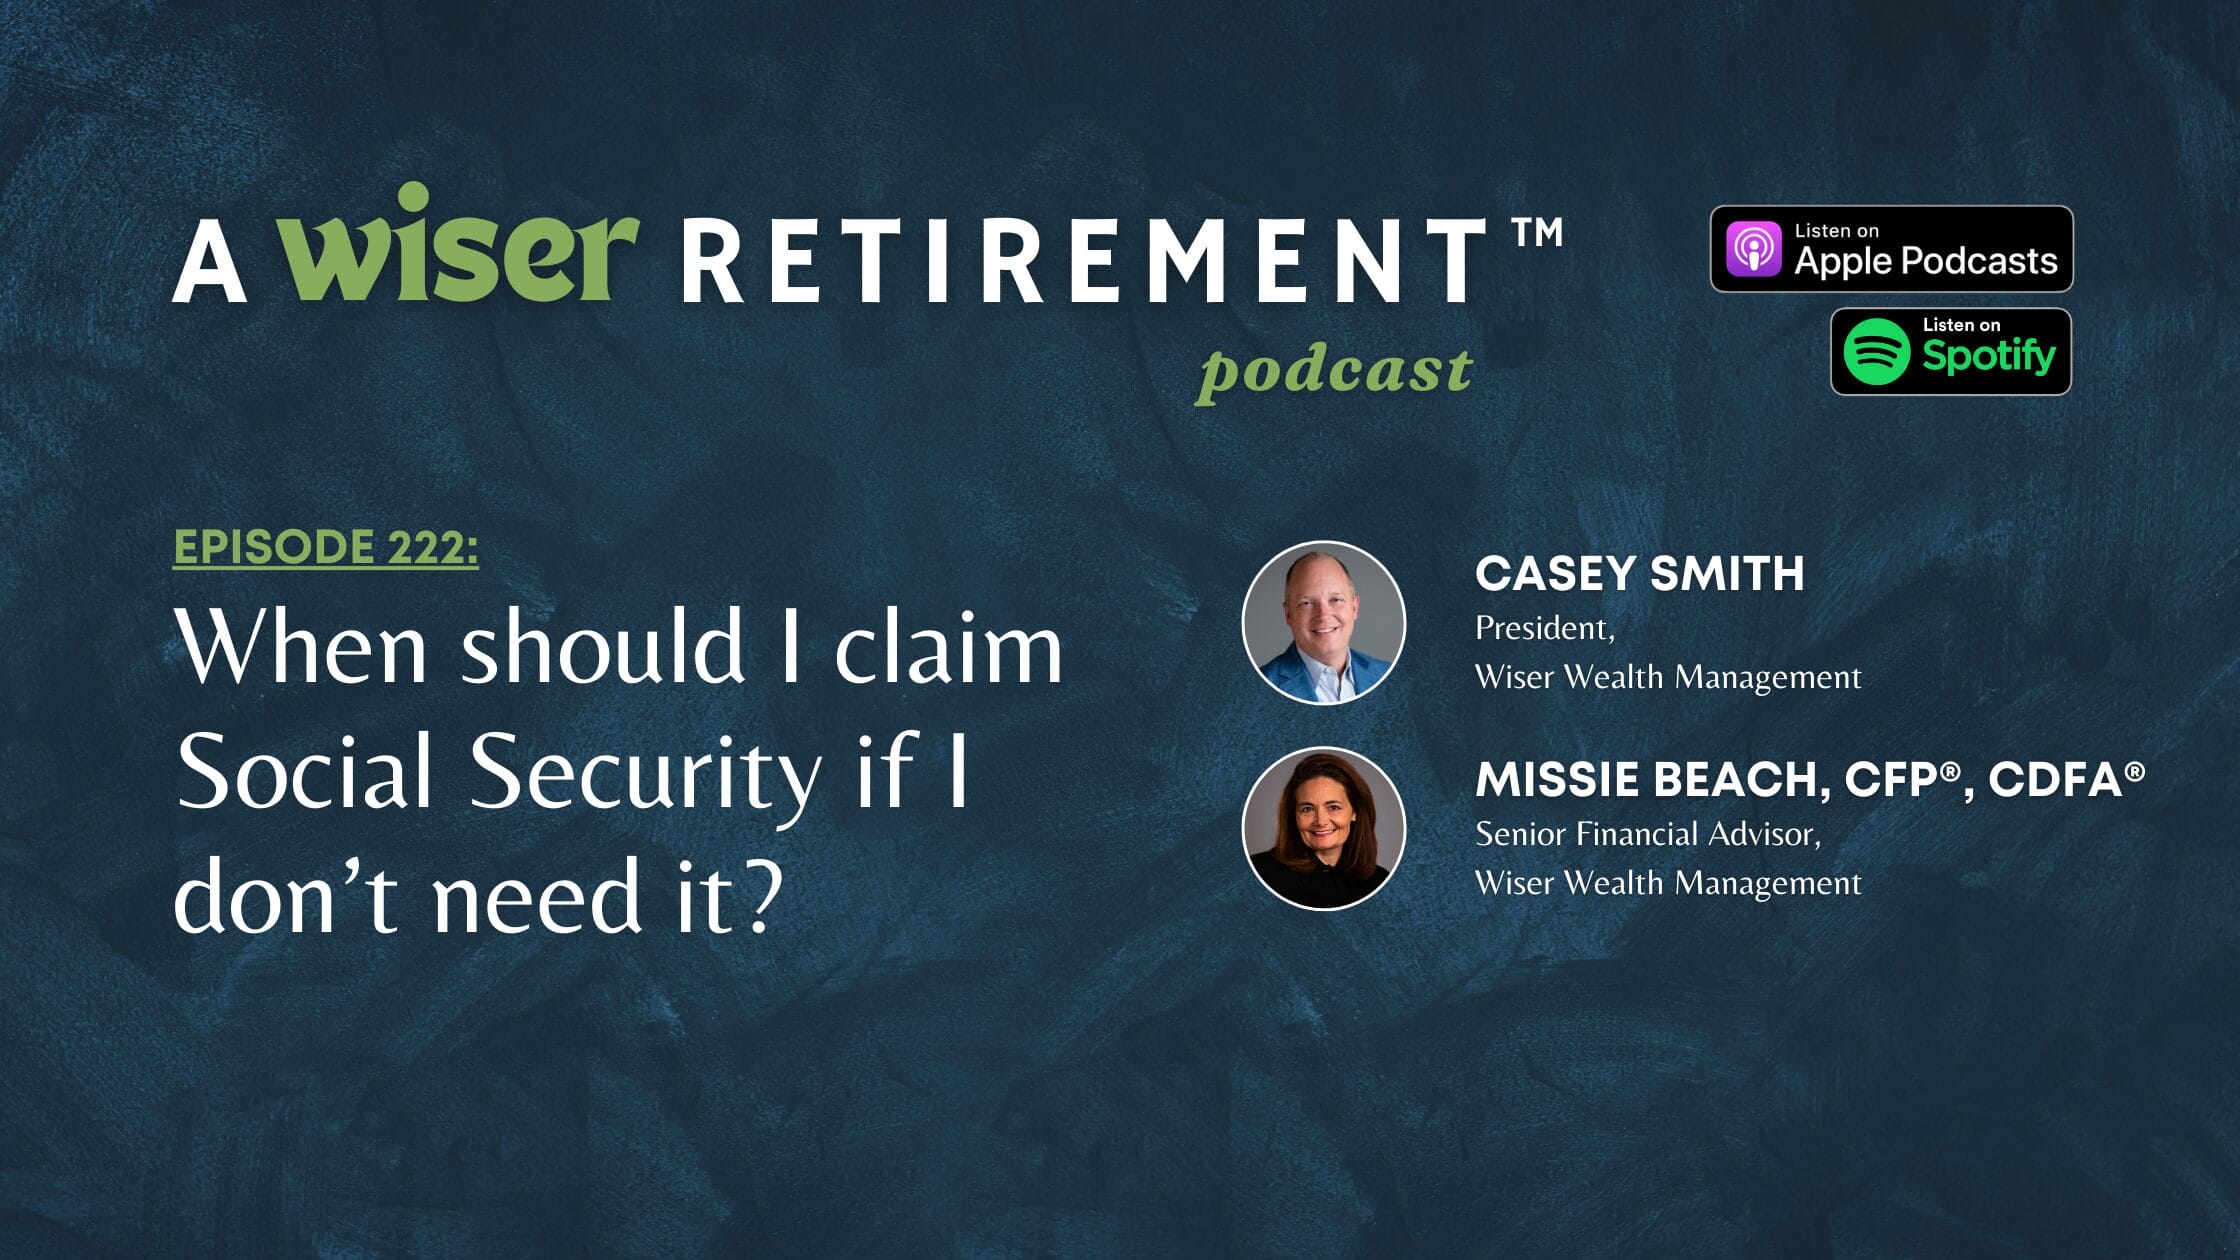 When should I claim Social Security if I don’t need it?